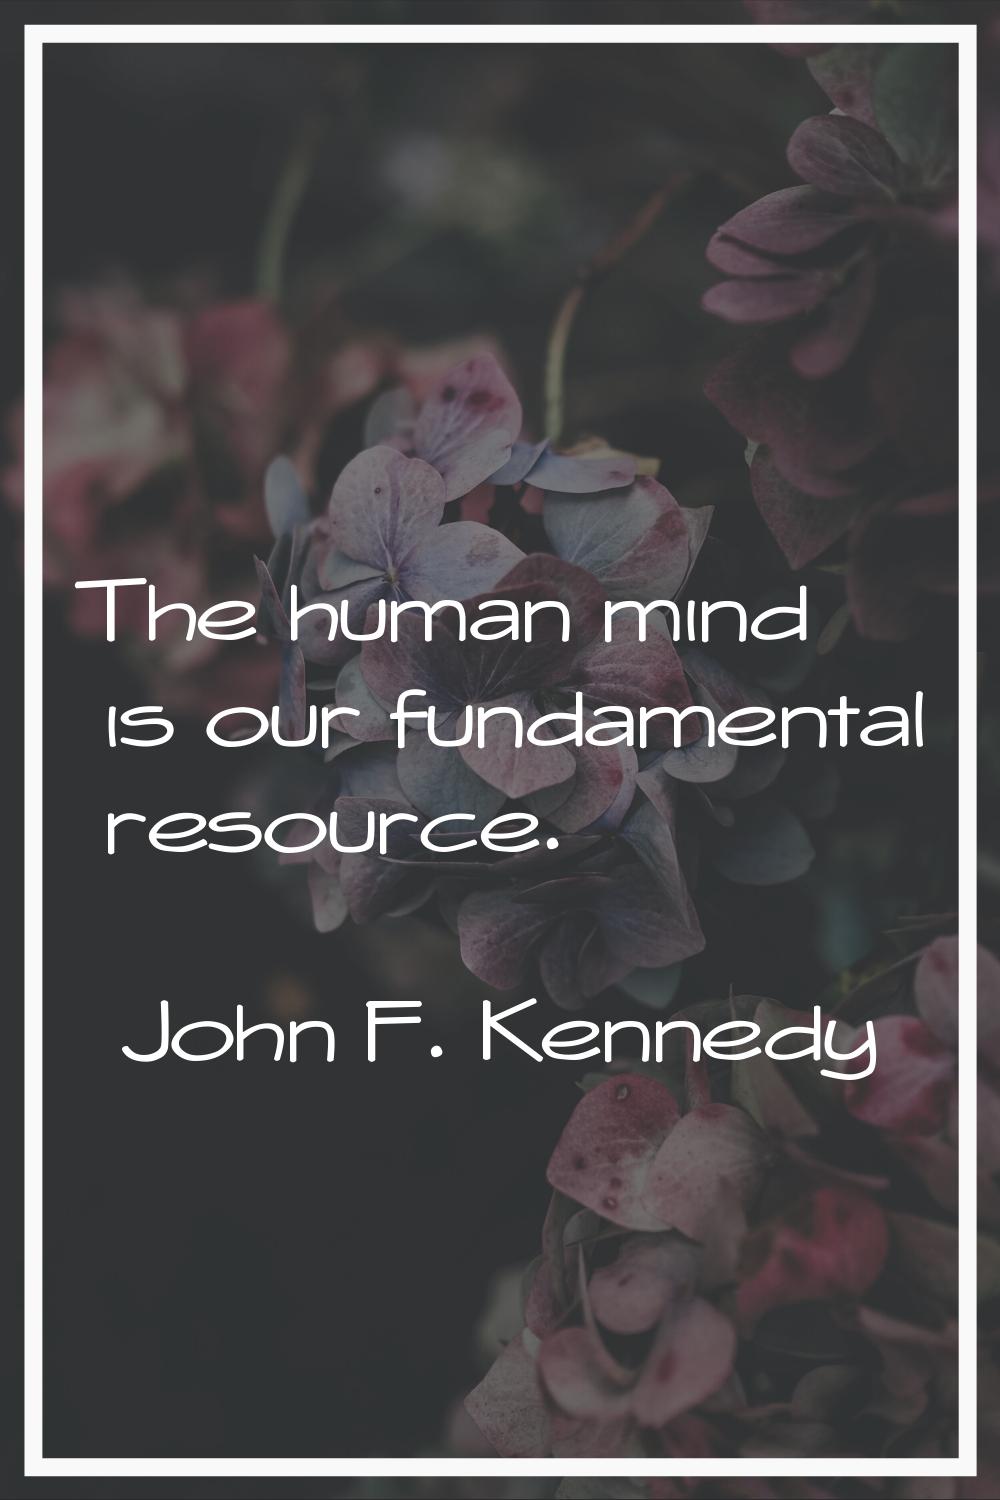 The human mind is our fundamental resource.